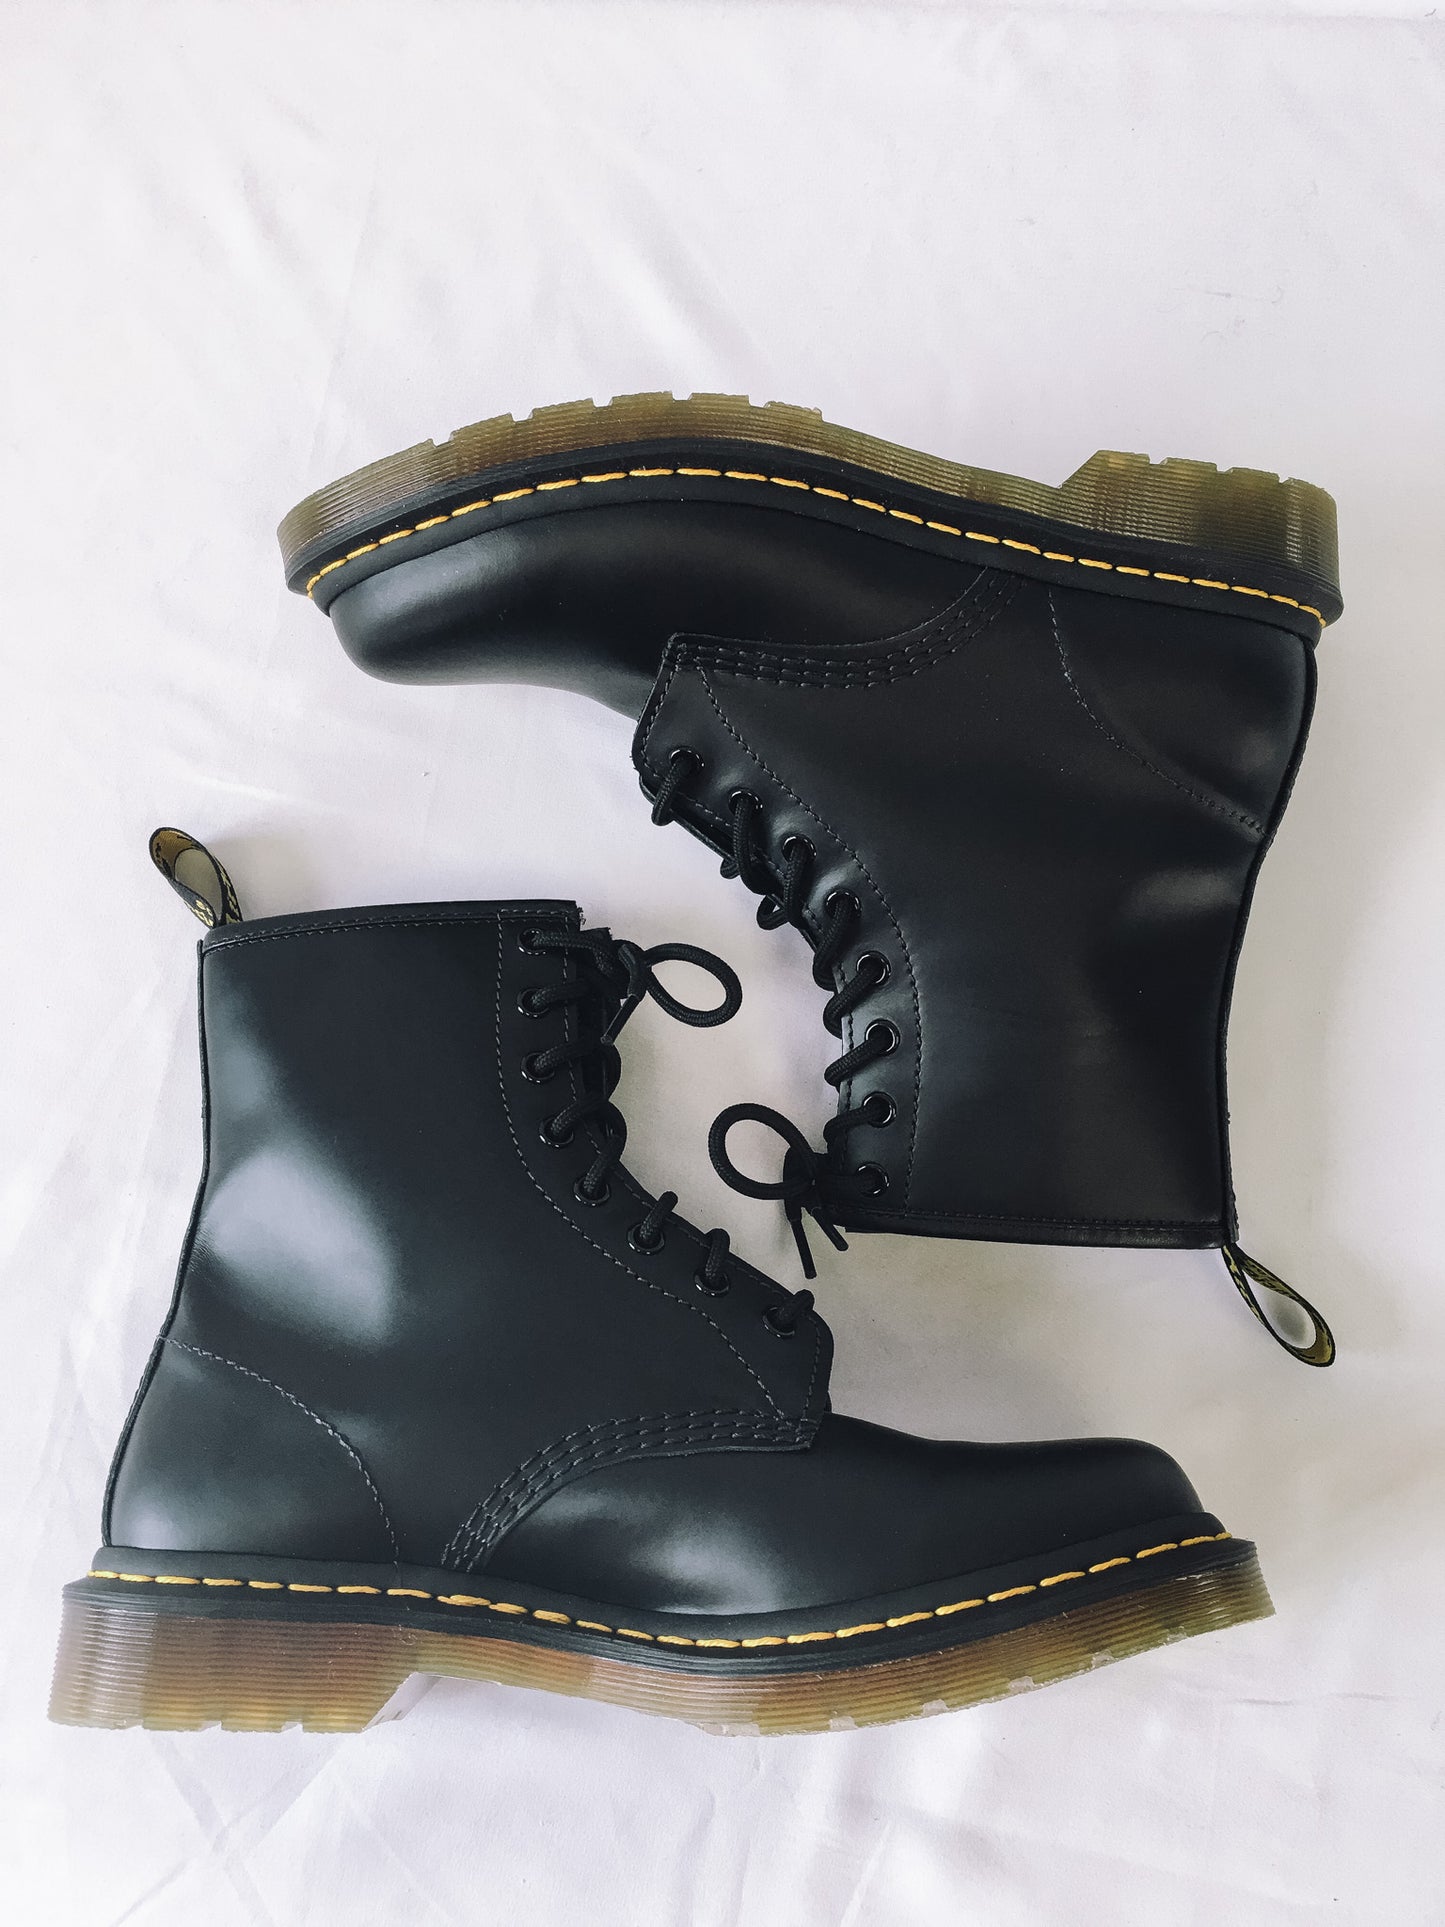 Dr. Martens 1460 Smooth Leather Lace Up Boots in Black, Women's Sz. 10, Men's Sz. 9